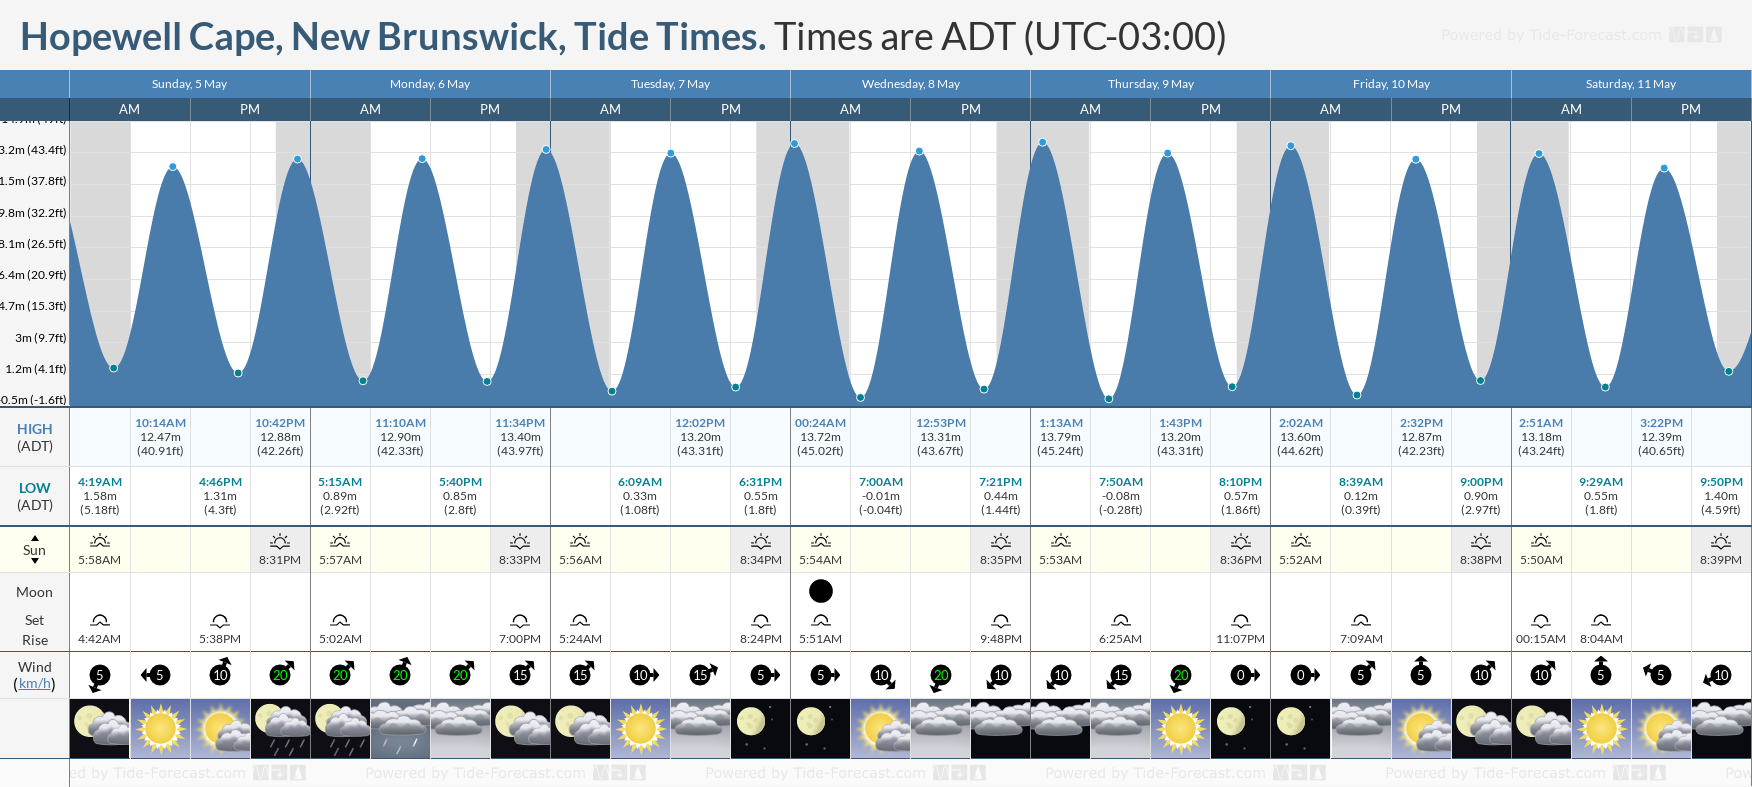 Hopewell Cape, New Brunswick Tide Chart including high and low tide tide times for the next 7 days